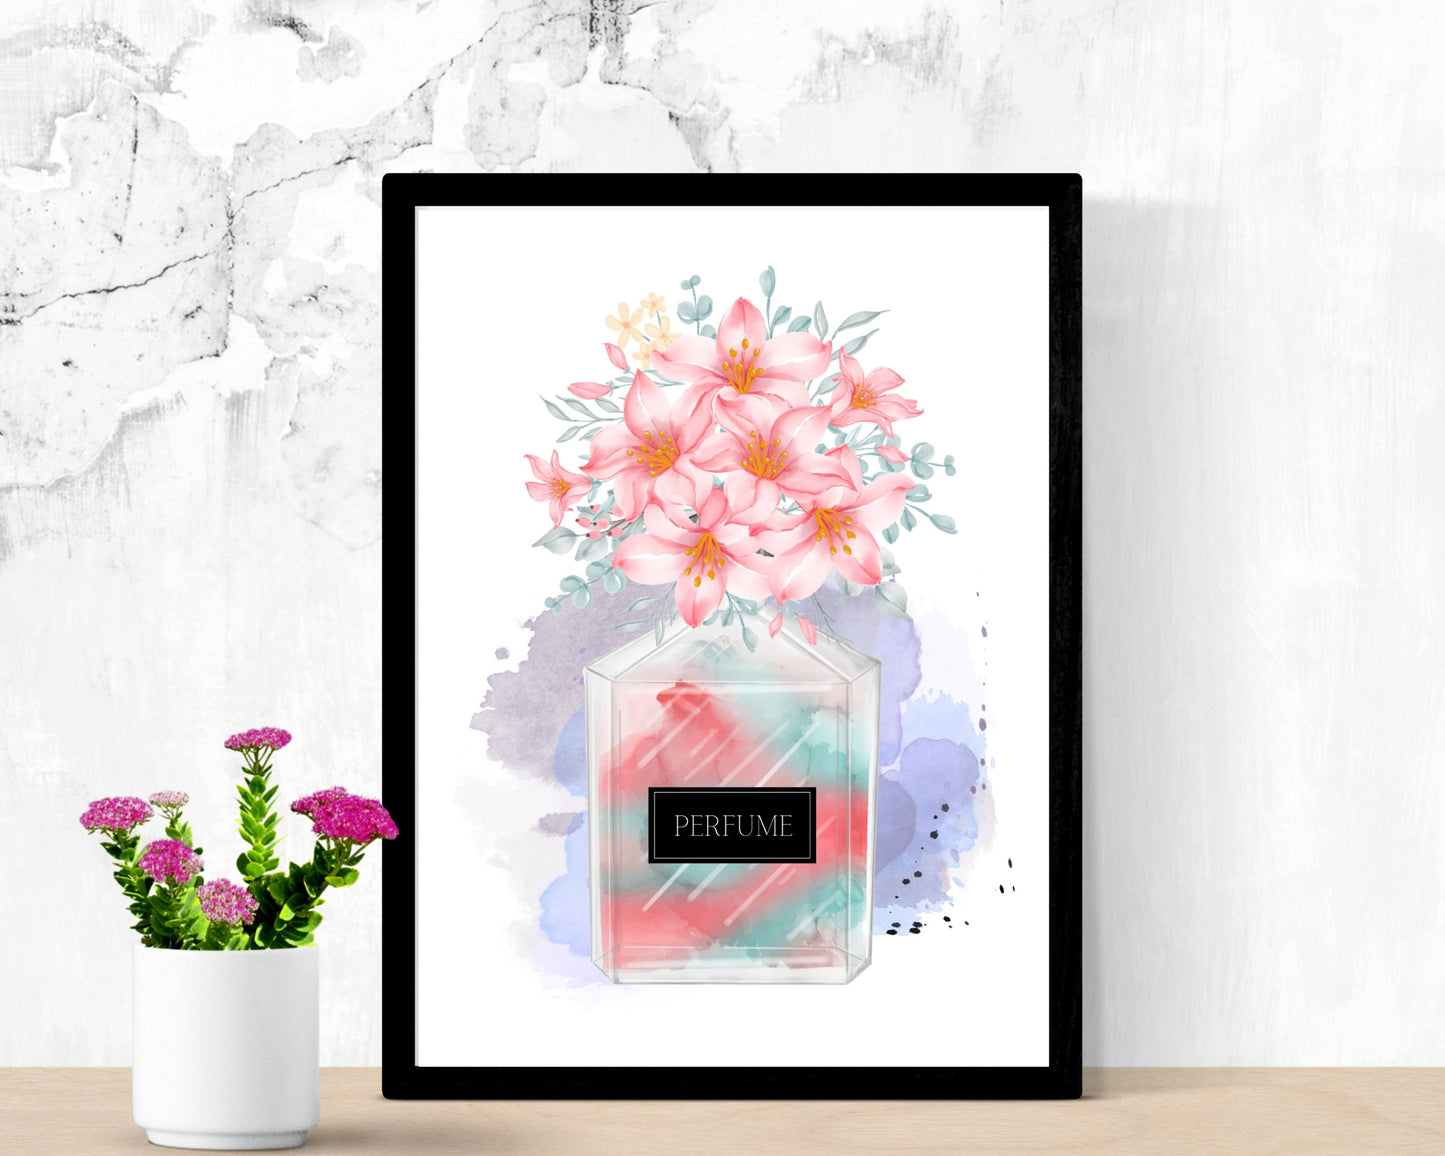 Red Perfume and flower wall art printable - DIGITAL DOWNLOAD